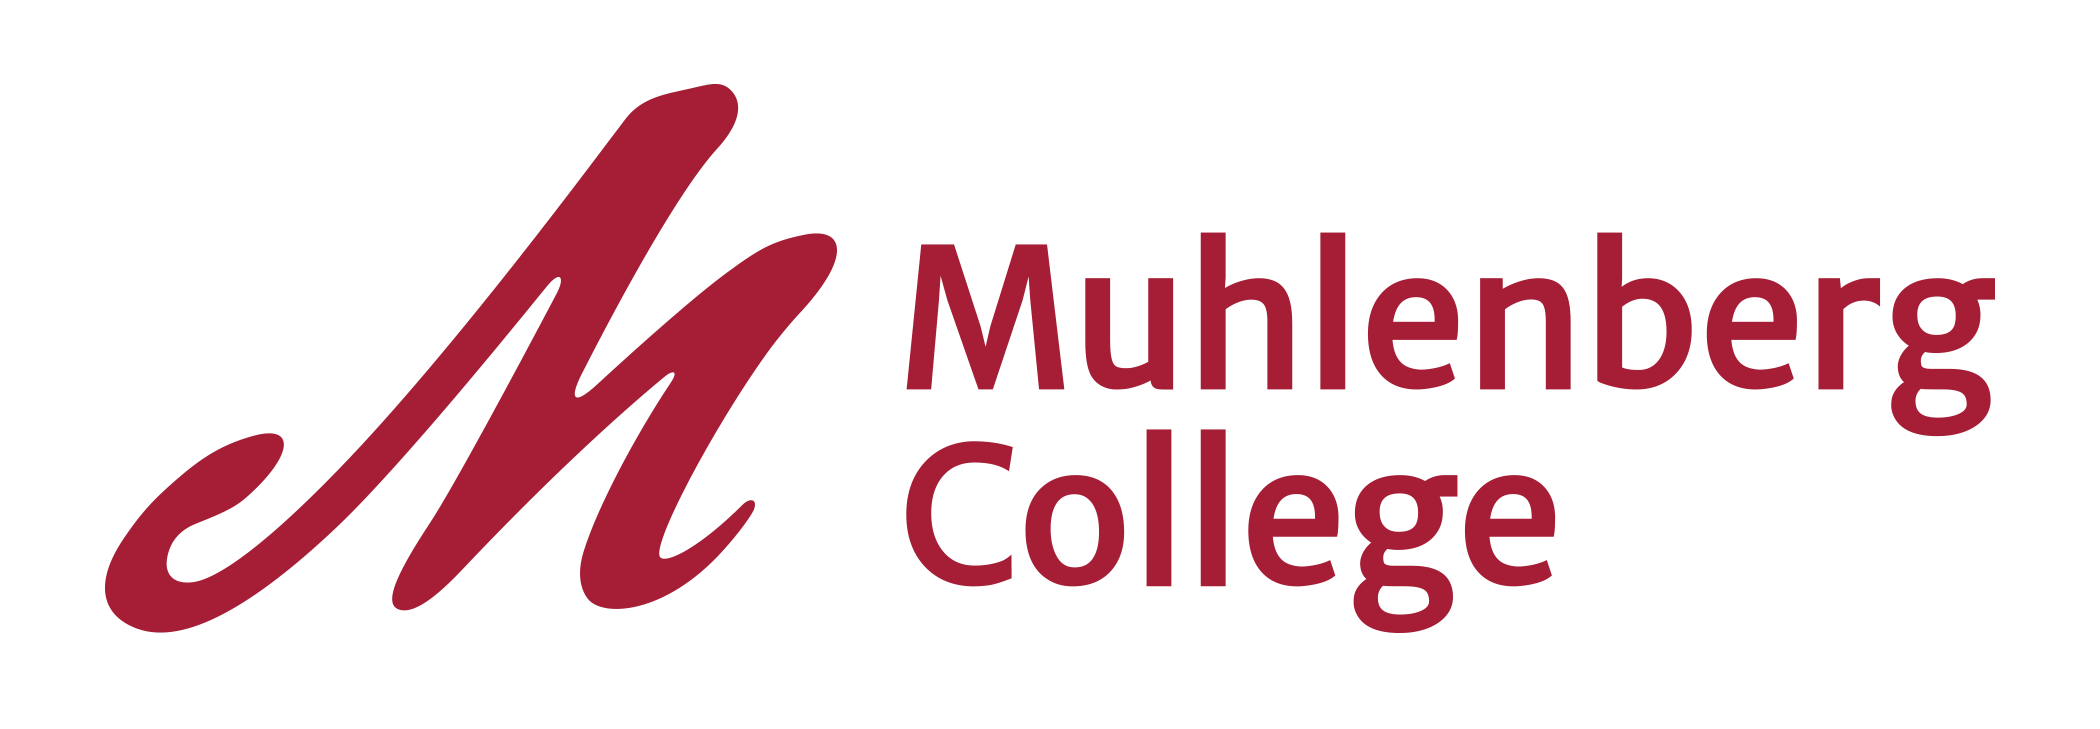 Link to the Muhlenberg College website